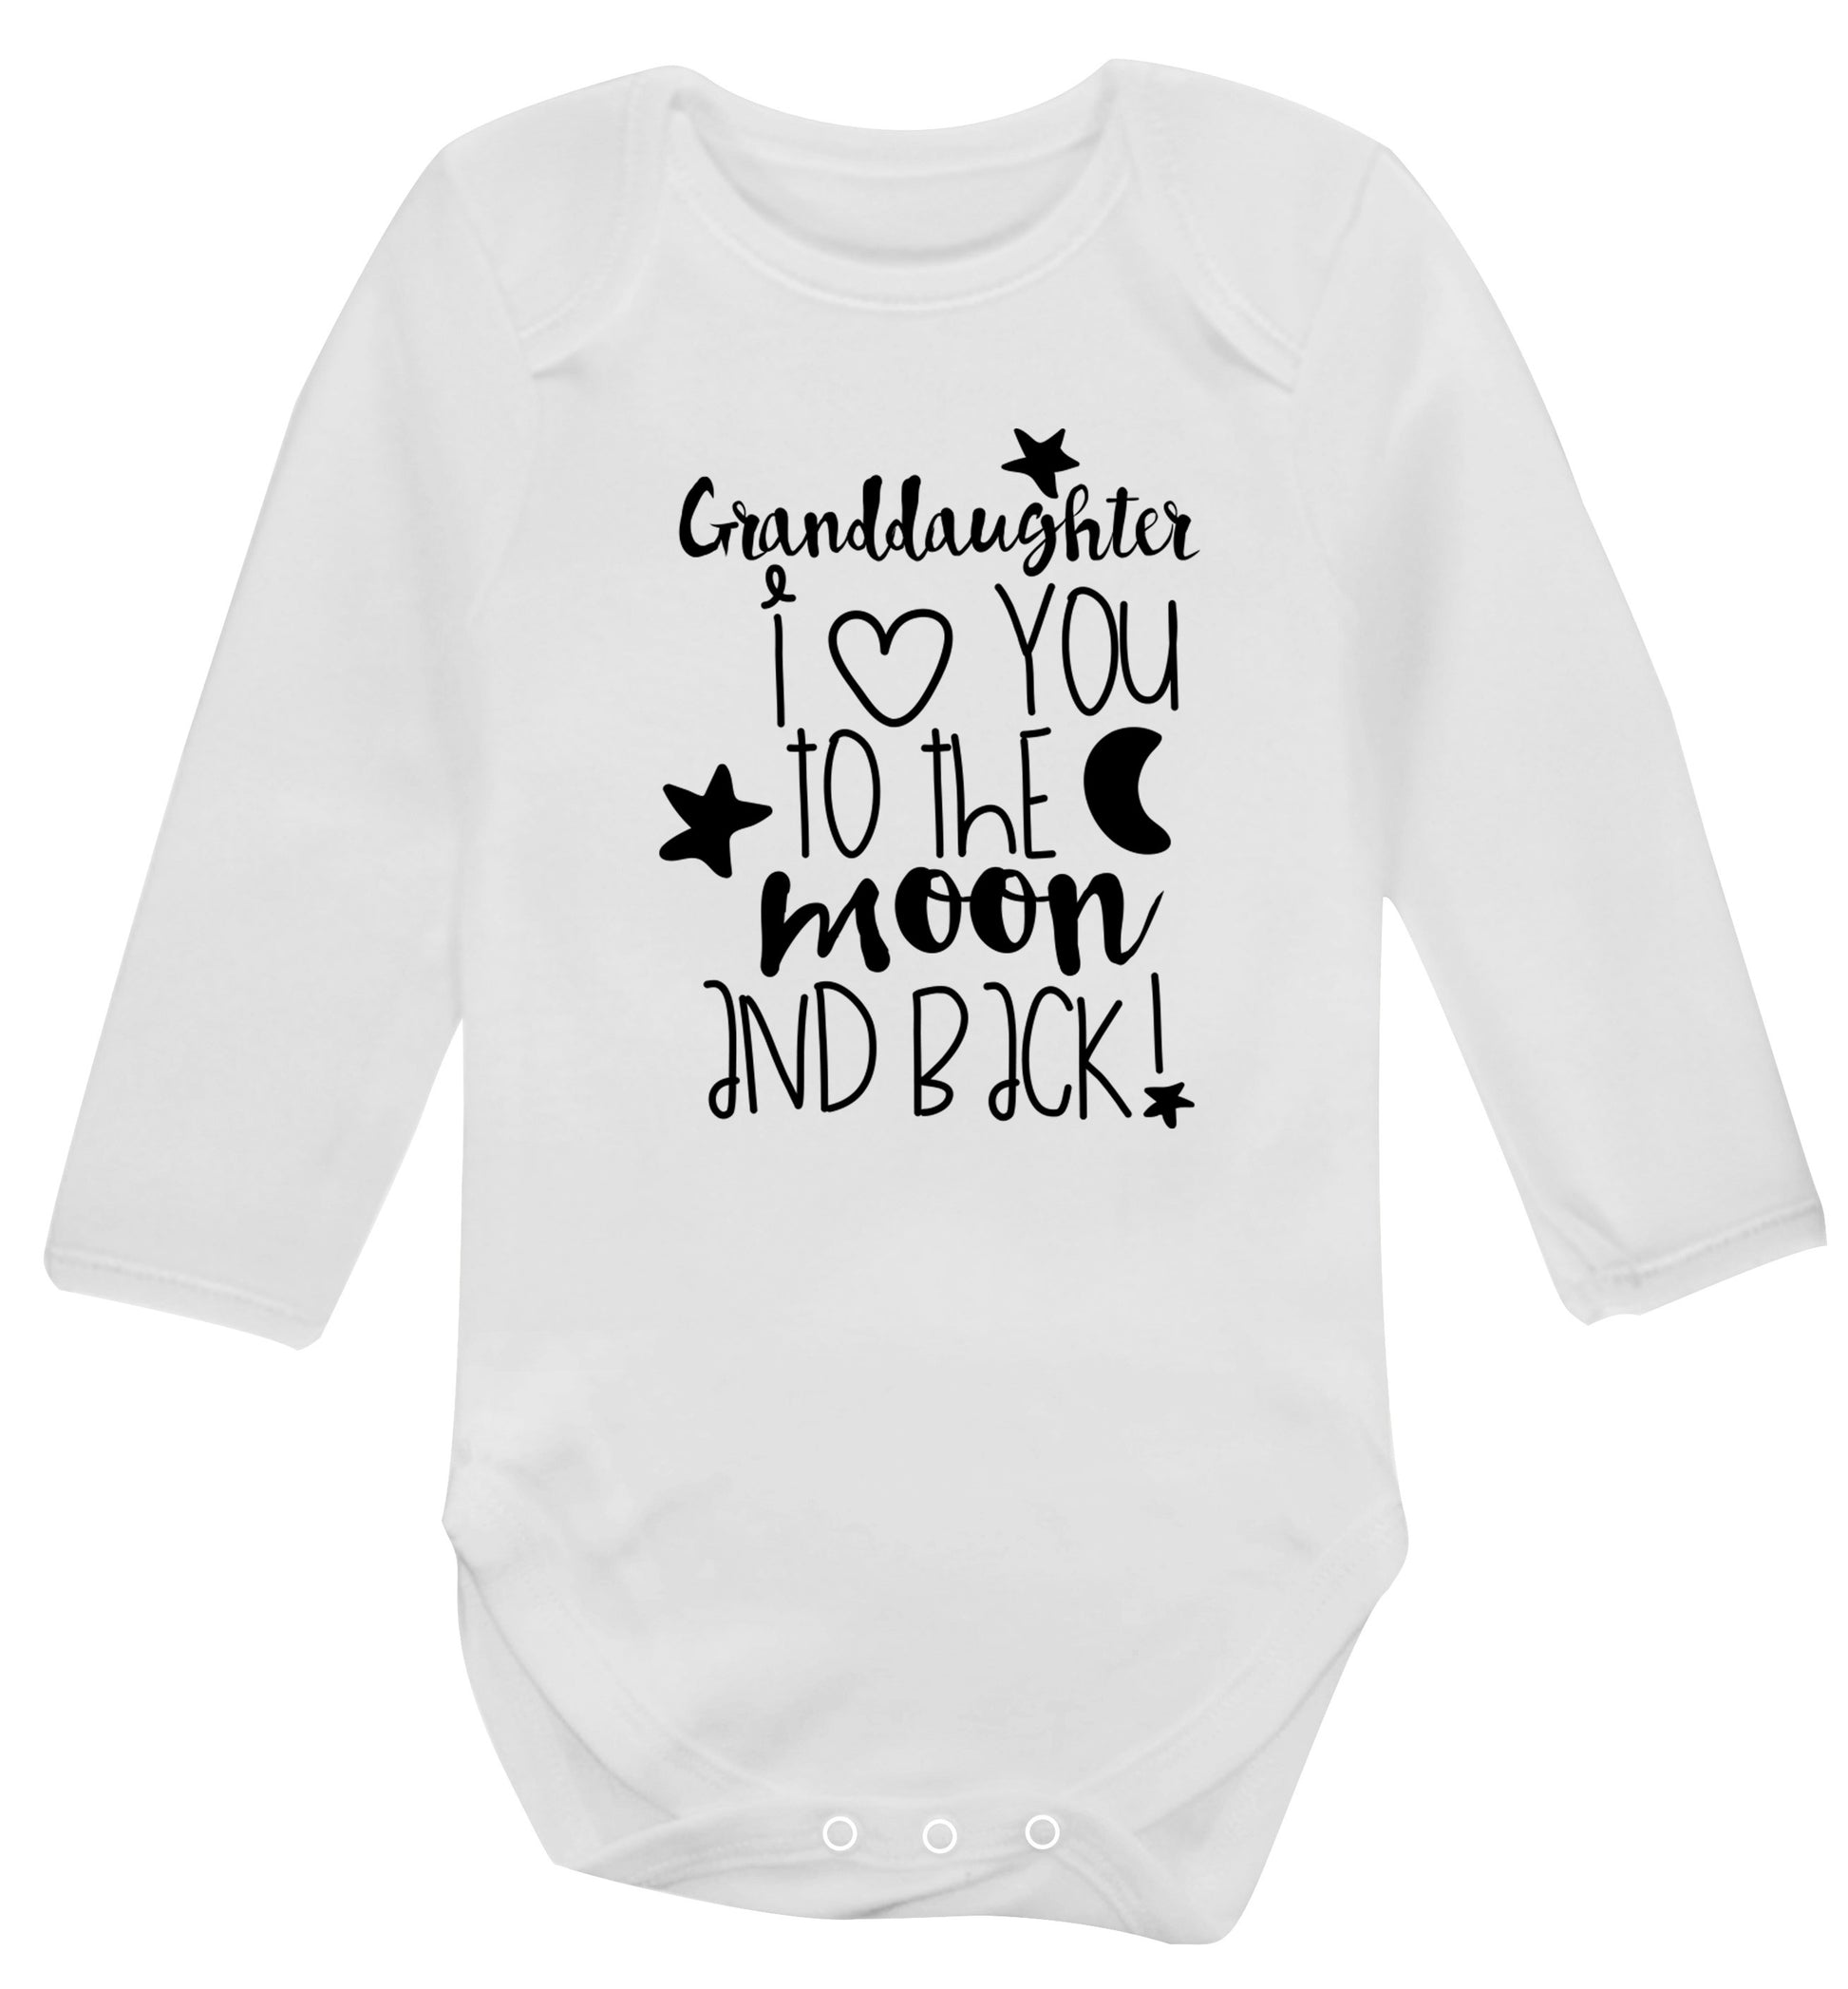 Granddaughter I love you to the moon and back Baby Vest long sleeved white 6-12 months